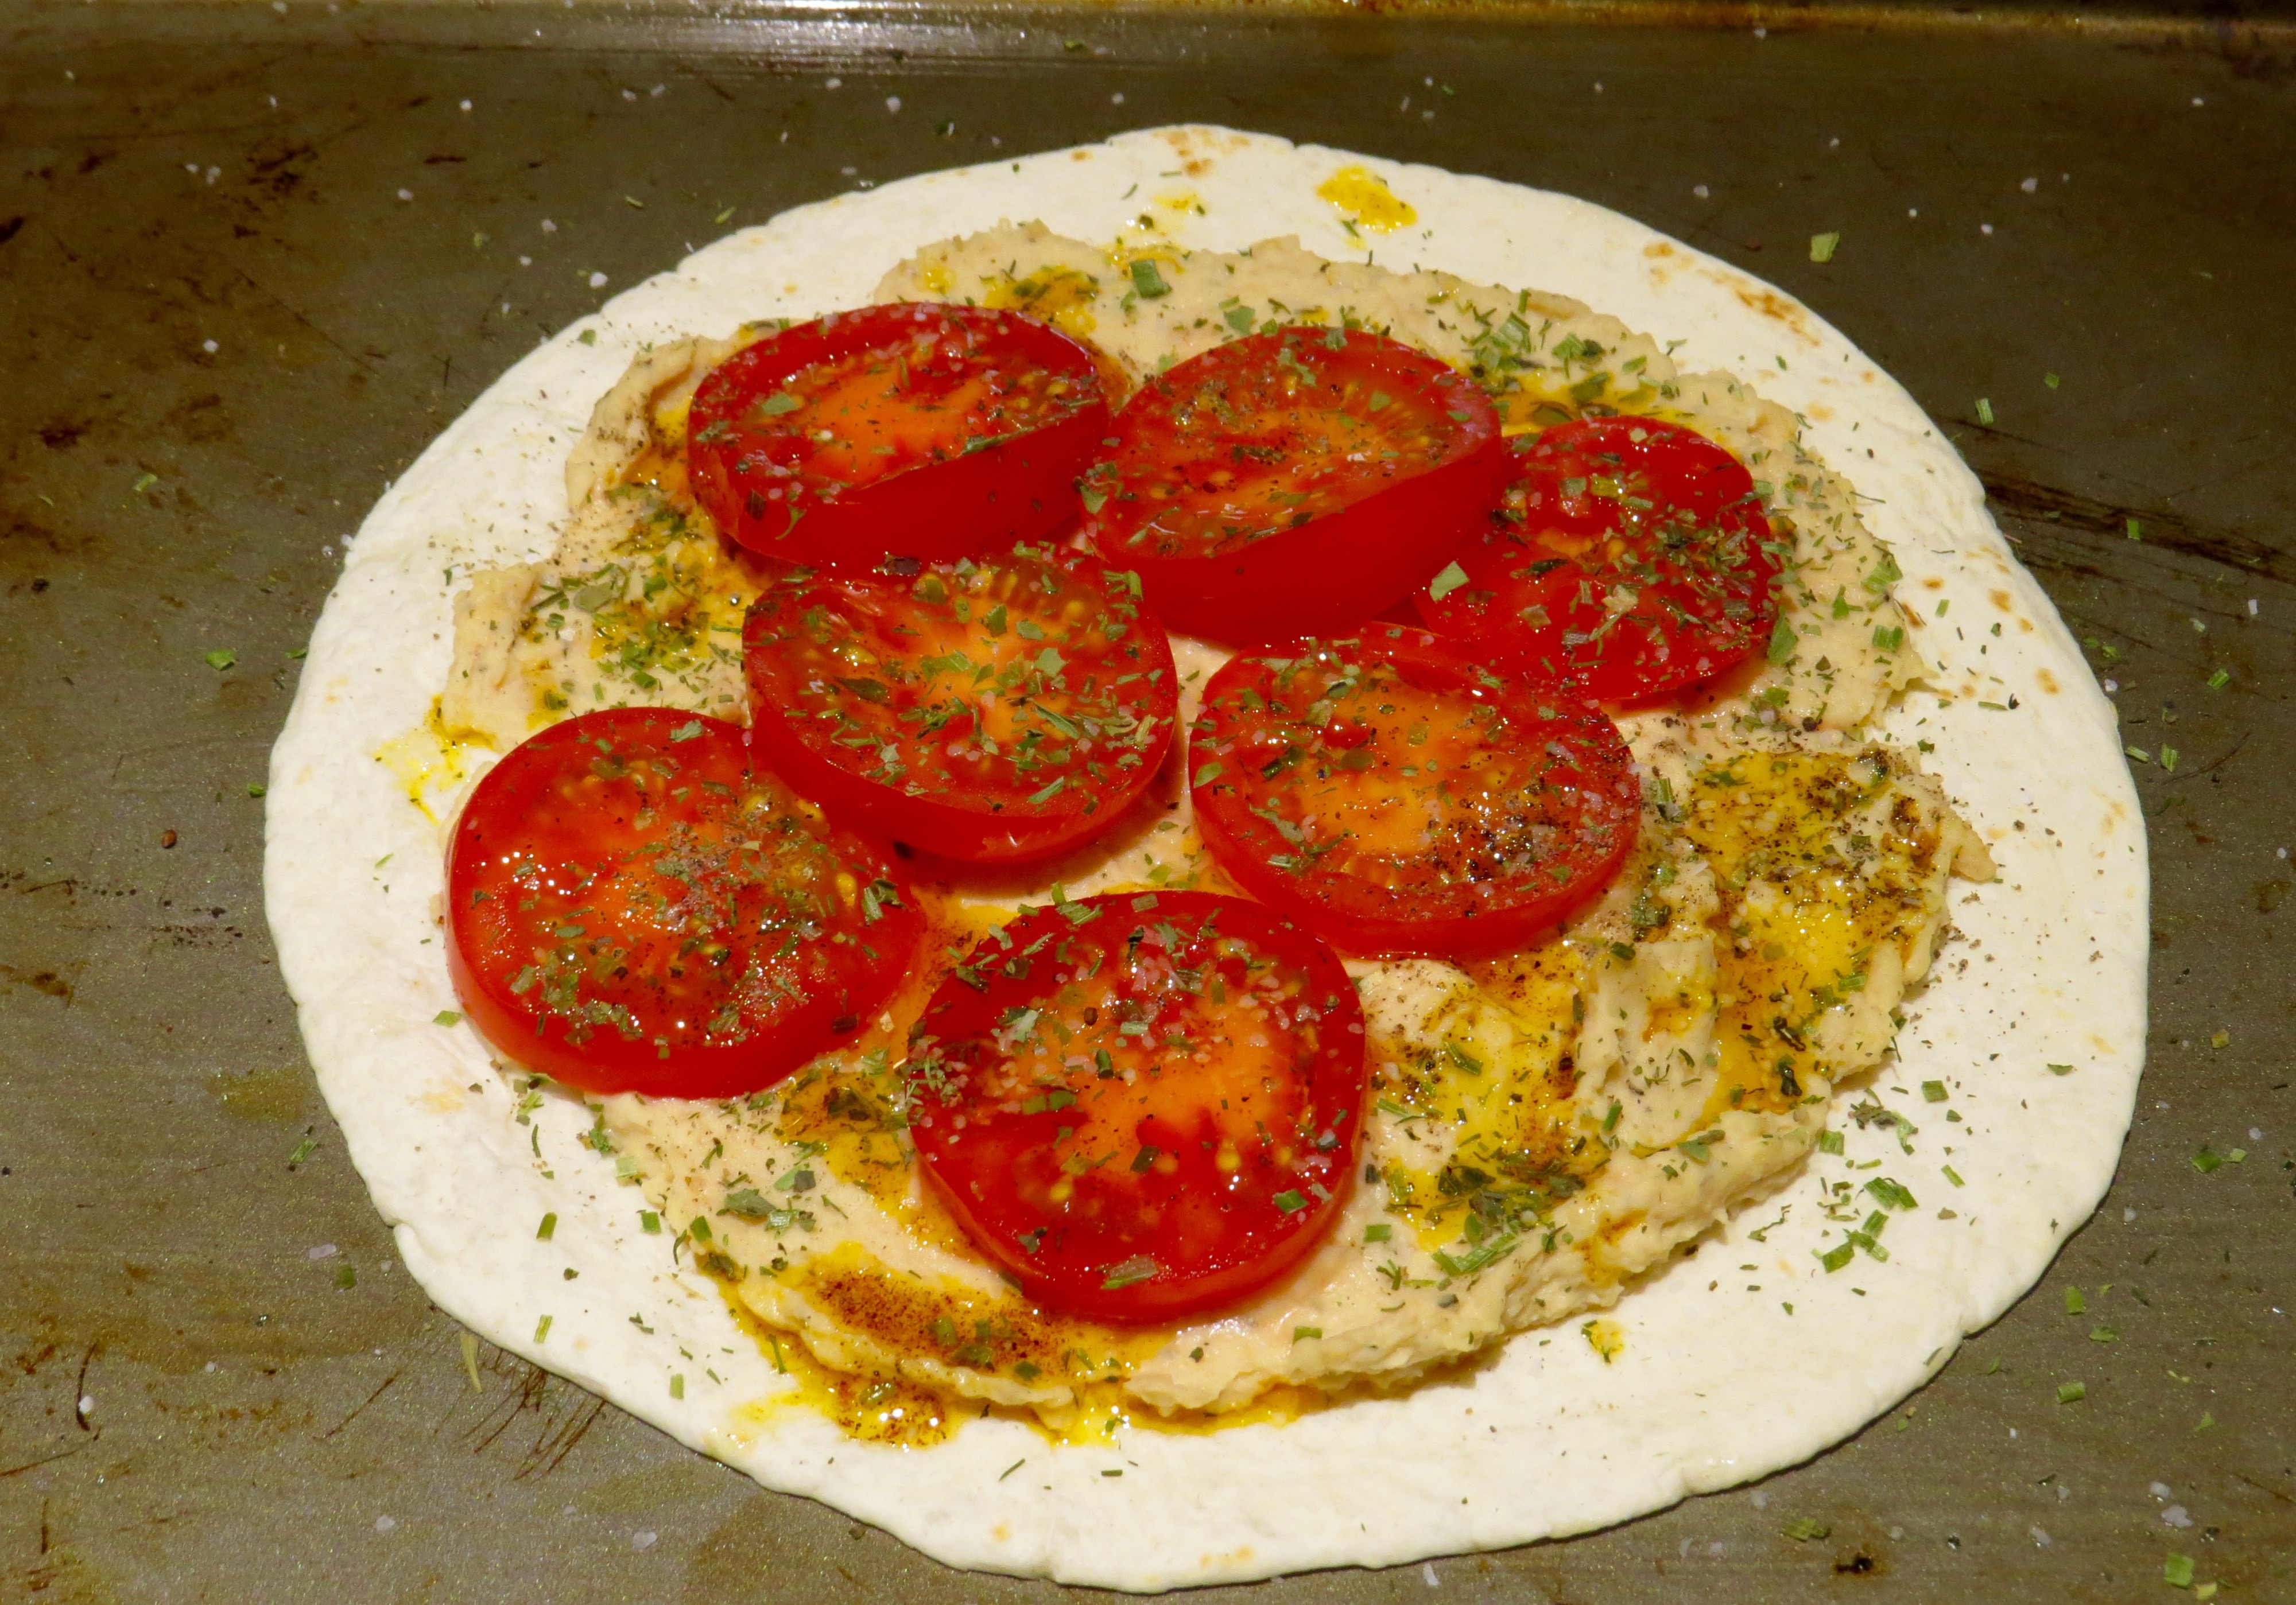 Lunch - Baked Tostadas: Flour Tortilla, hummus spread, sliced tomatoes, chopped herbs. Ready for a 400 degree oven for 10 minutes.